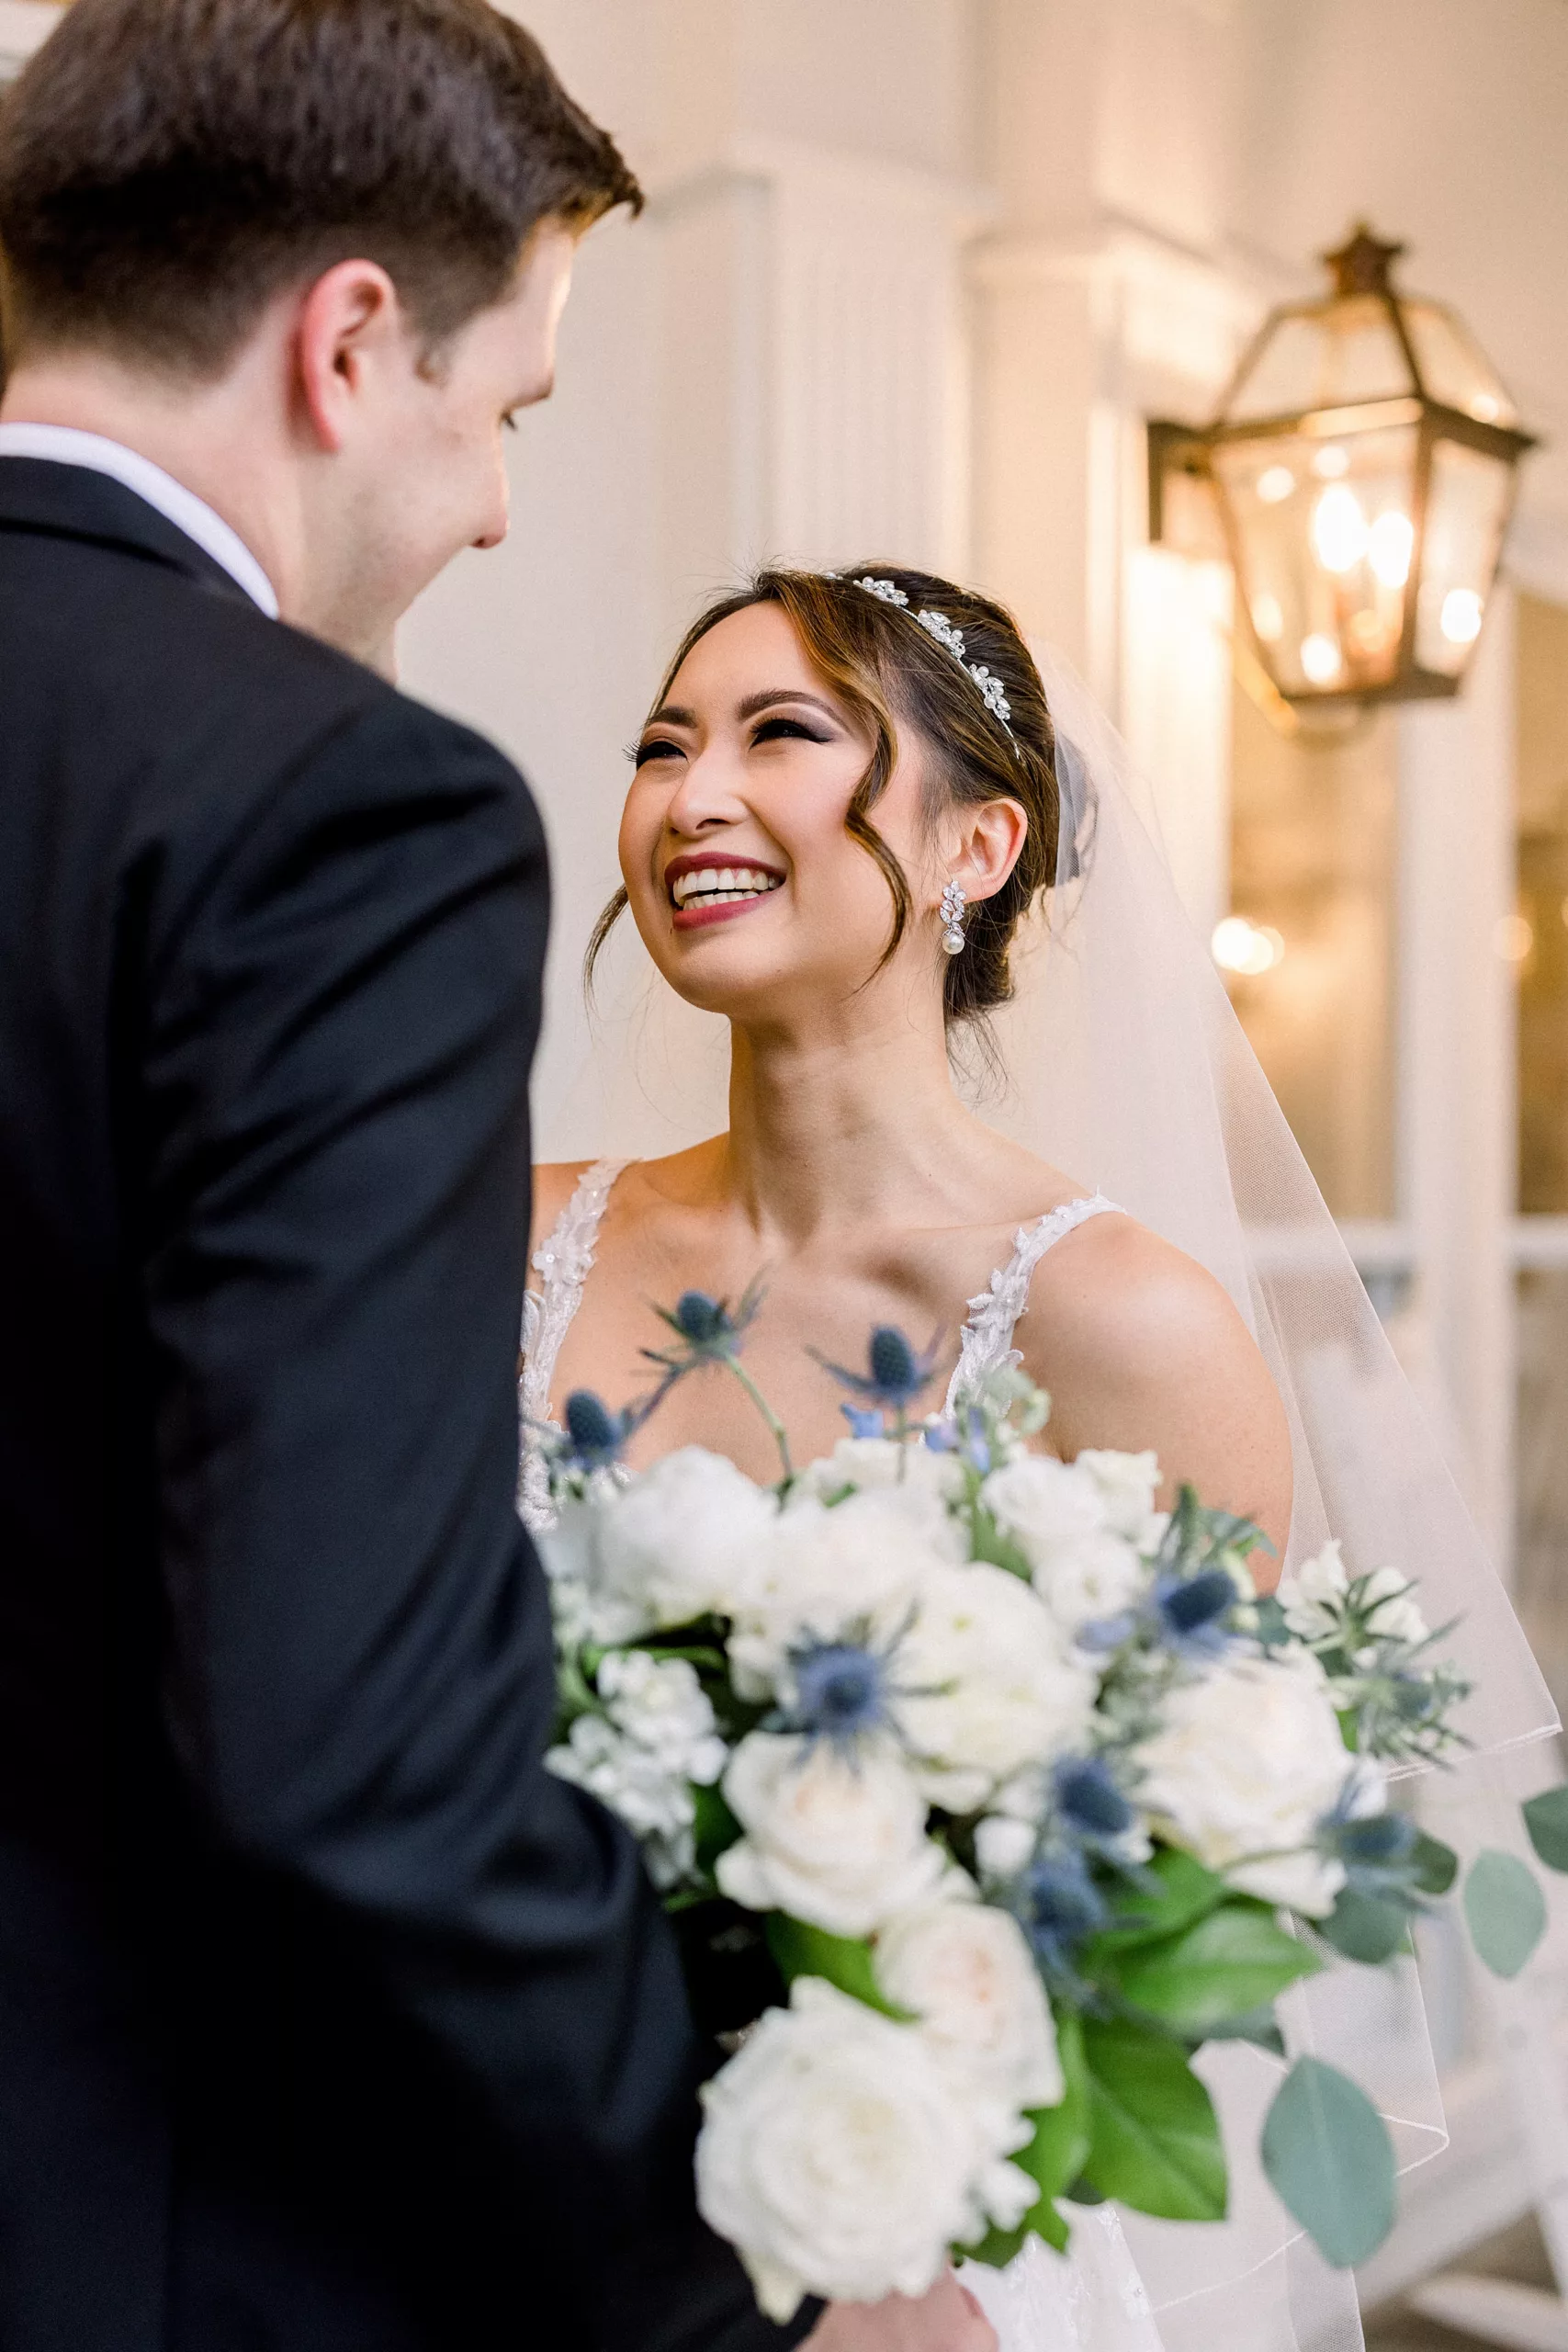 A bride in a lace dress smiles at her husband as he sees her for the first time at their first look wedding